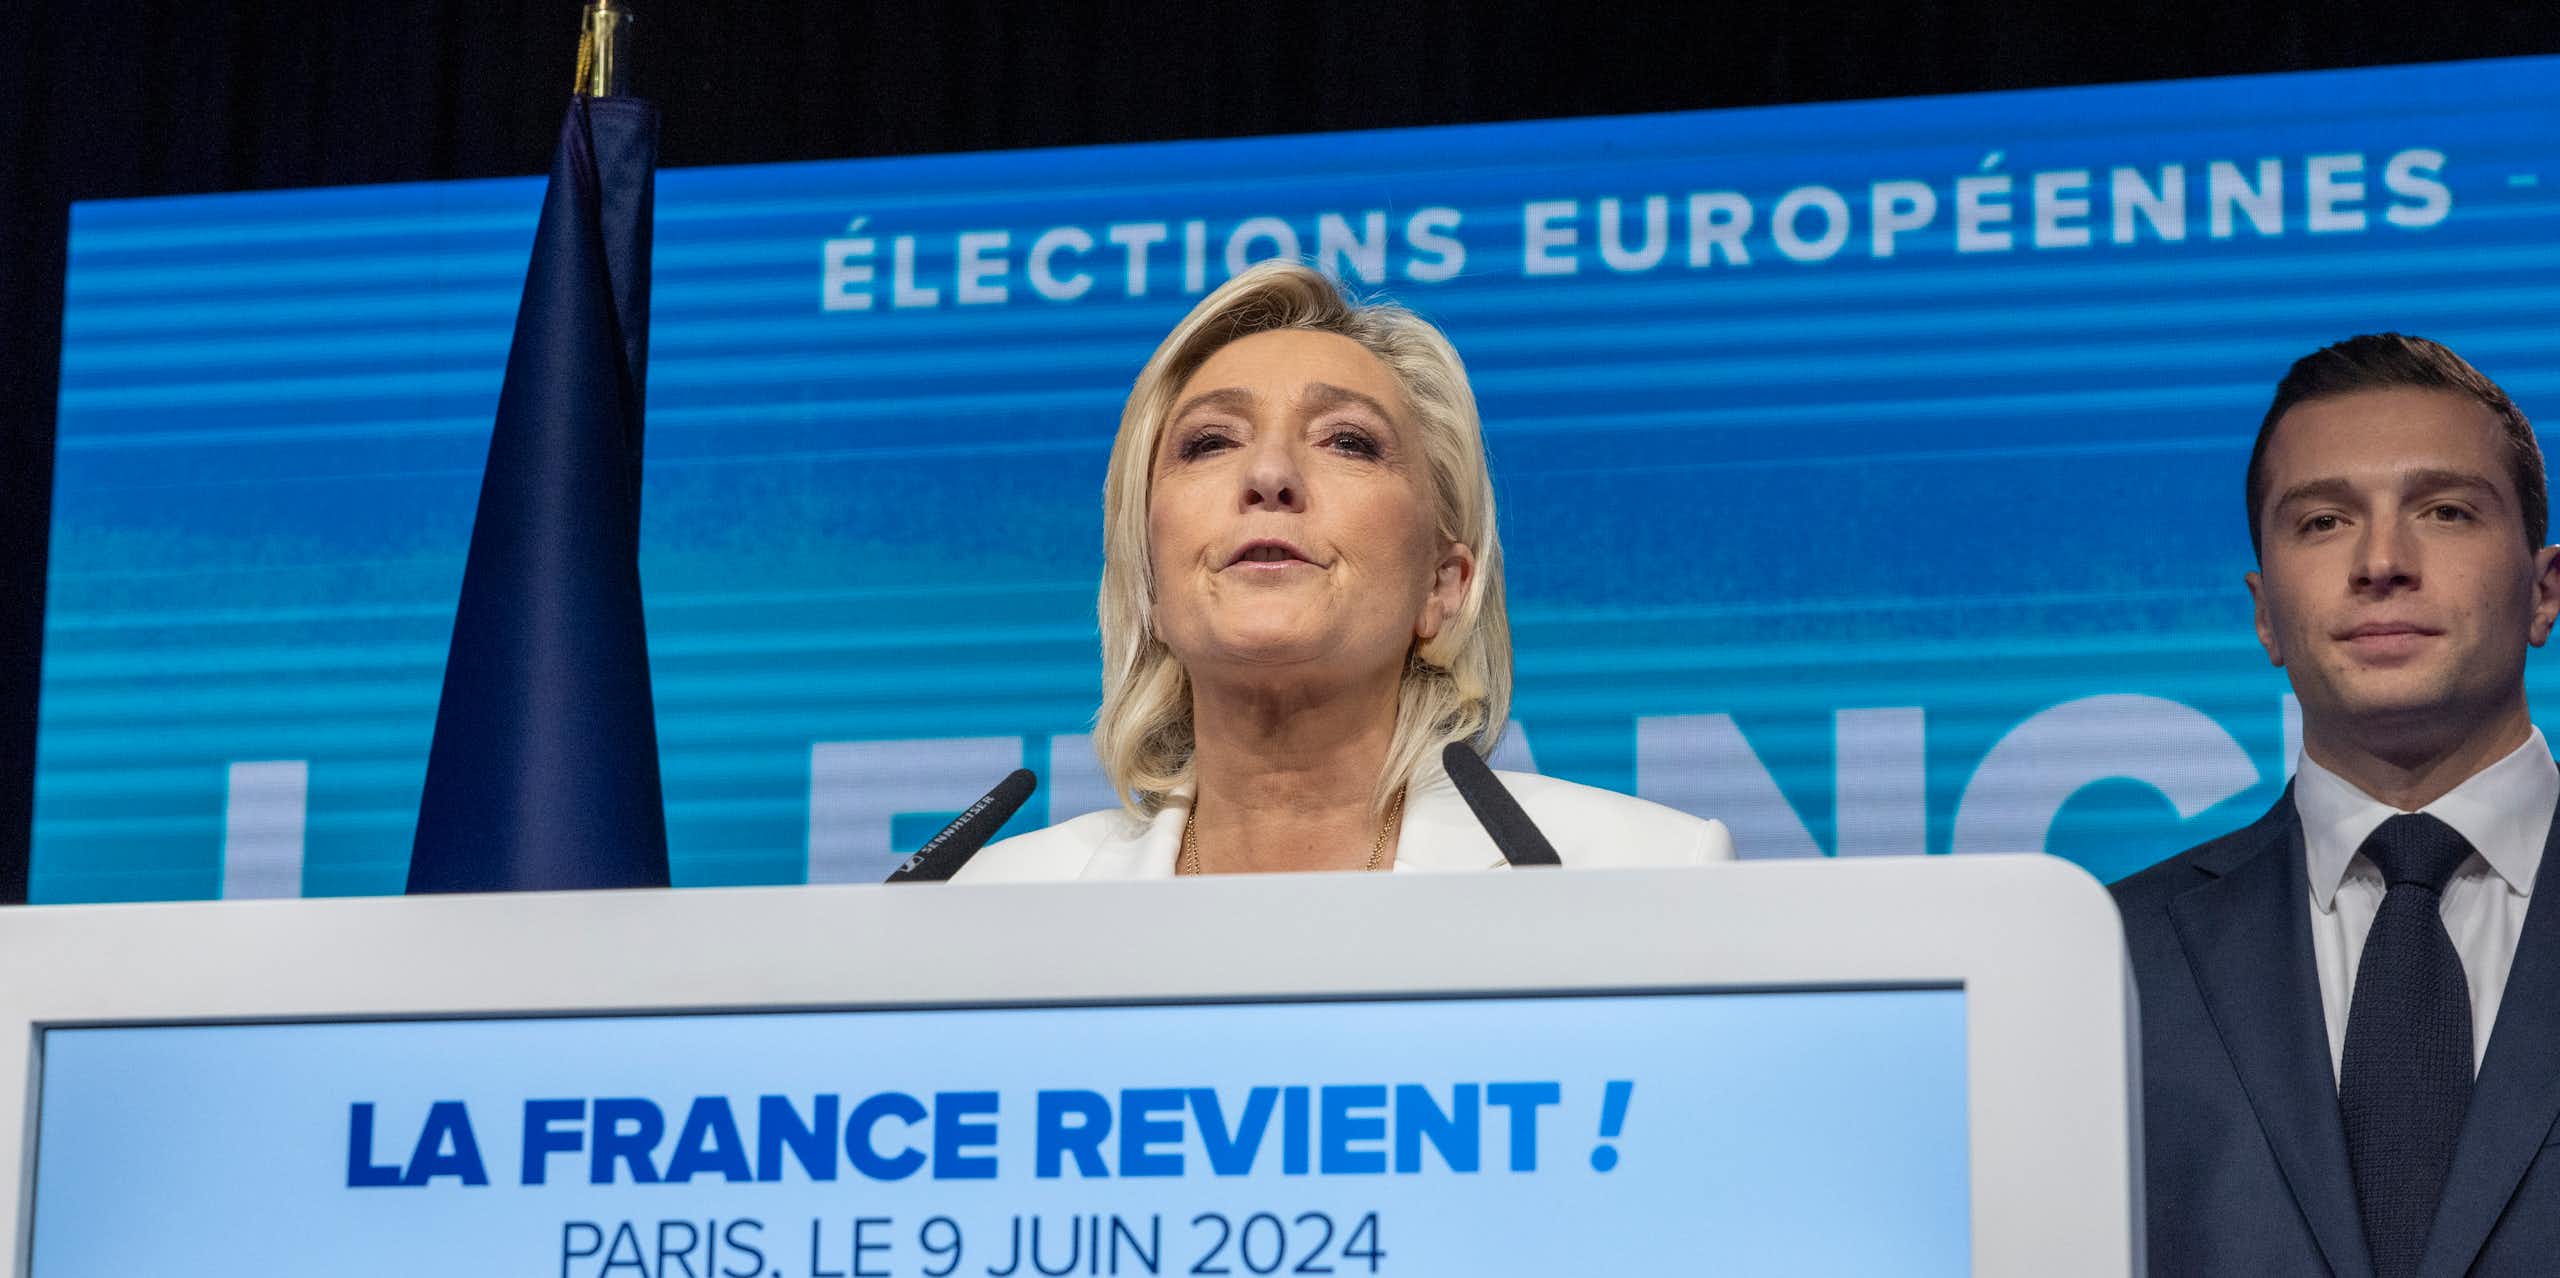 Marine Le Pen delivering a speech while a man in a suit stands in the background smiling.